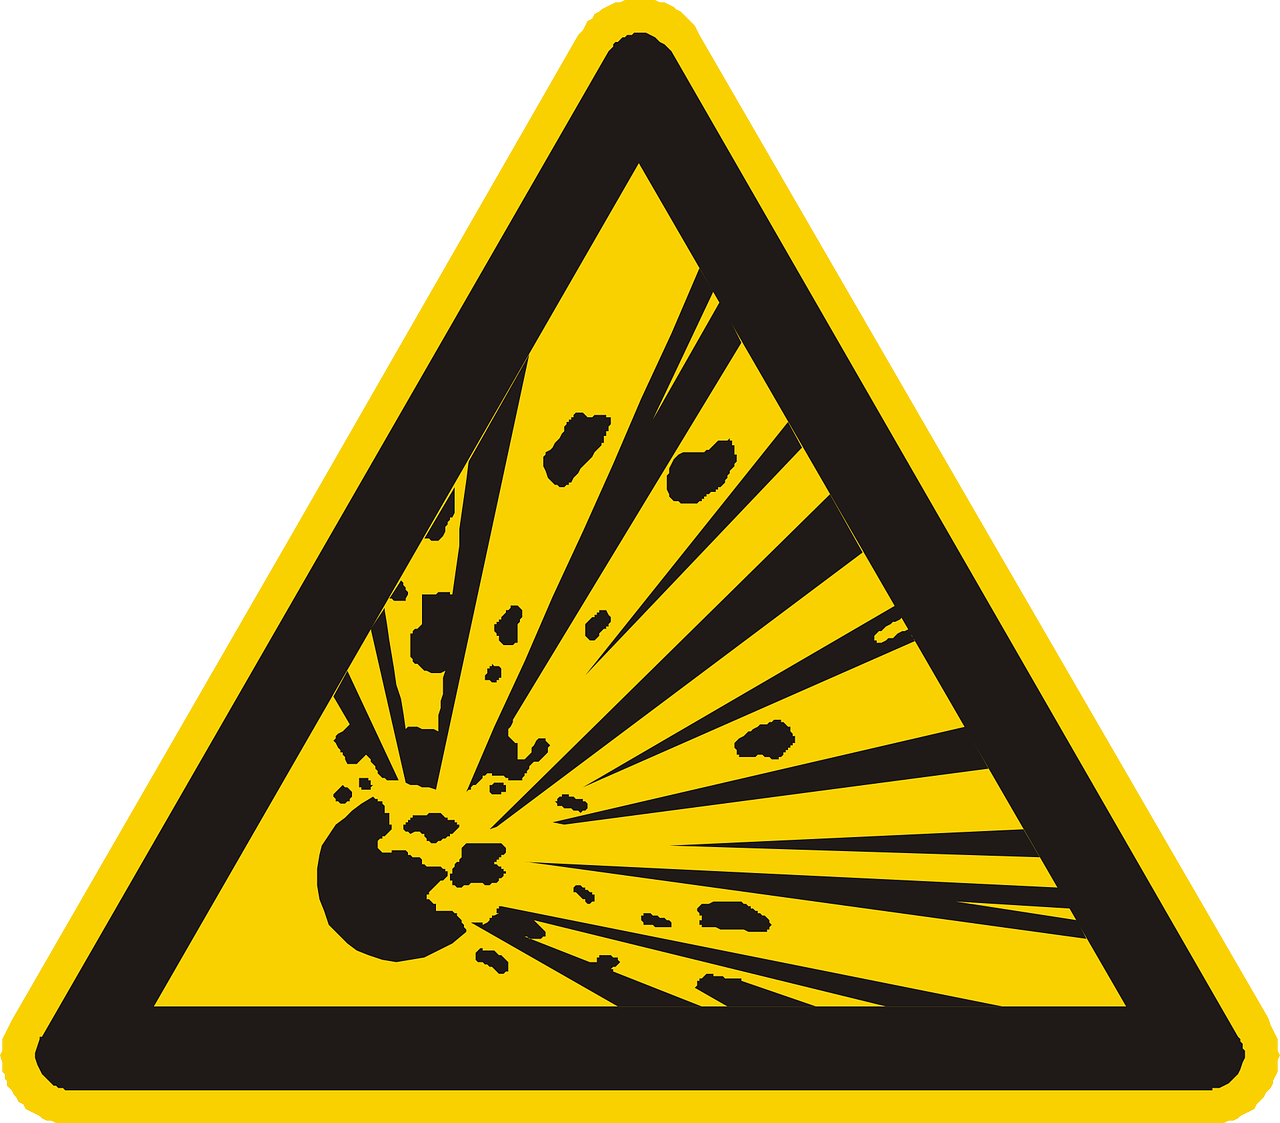 Warning triangle yellow with black border in one corner a round bomb explodes radiating out into the corners of the triangle